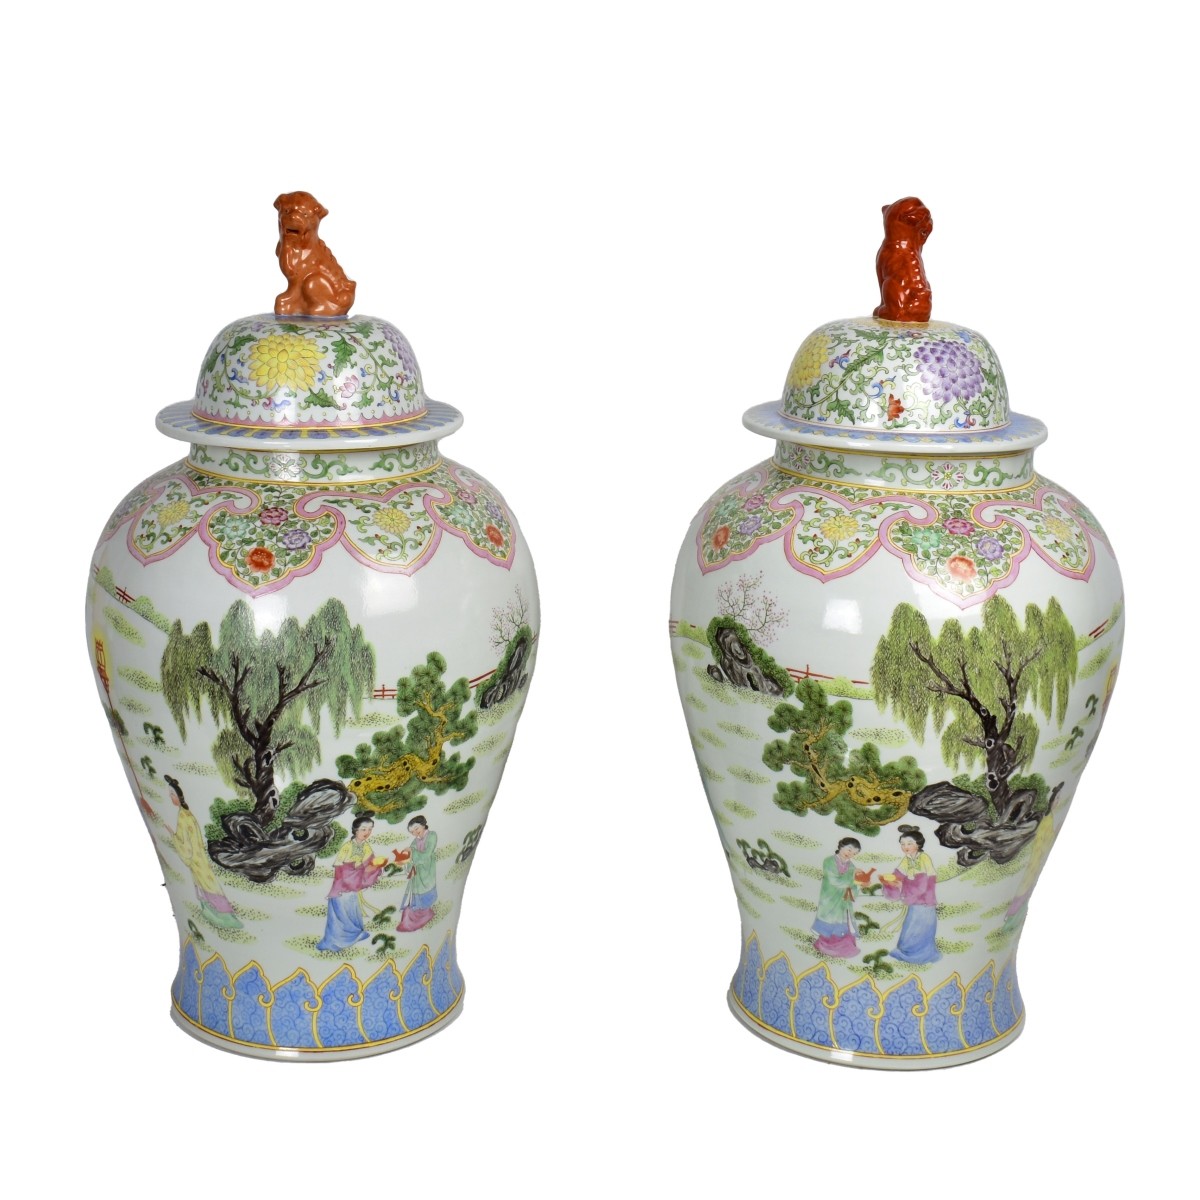 Pair of Large Chinese Covered Jars